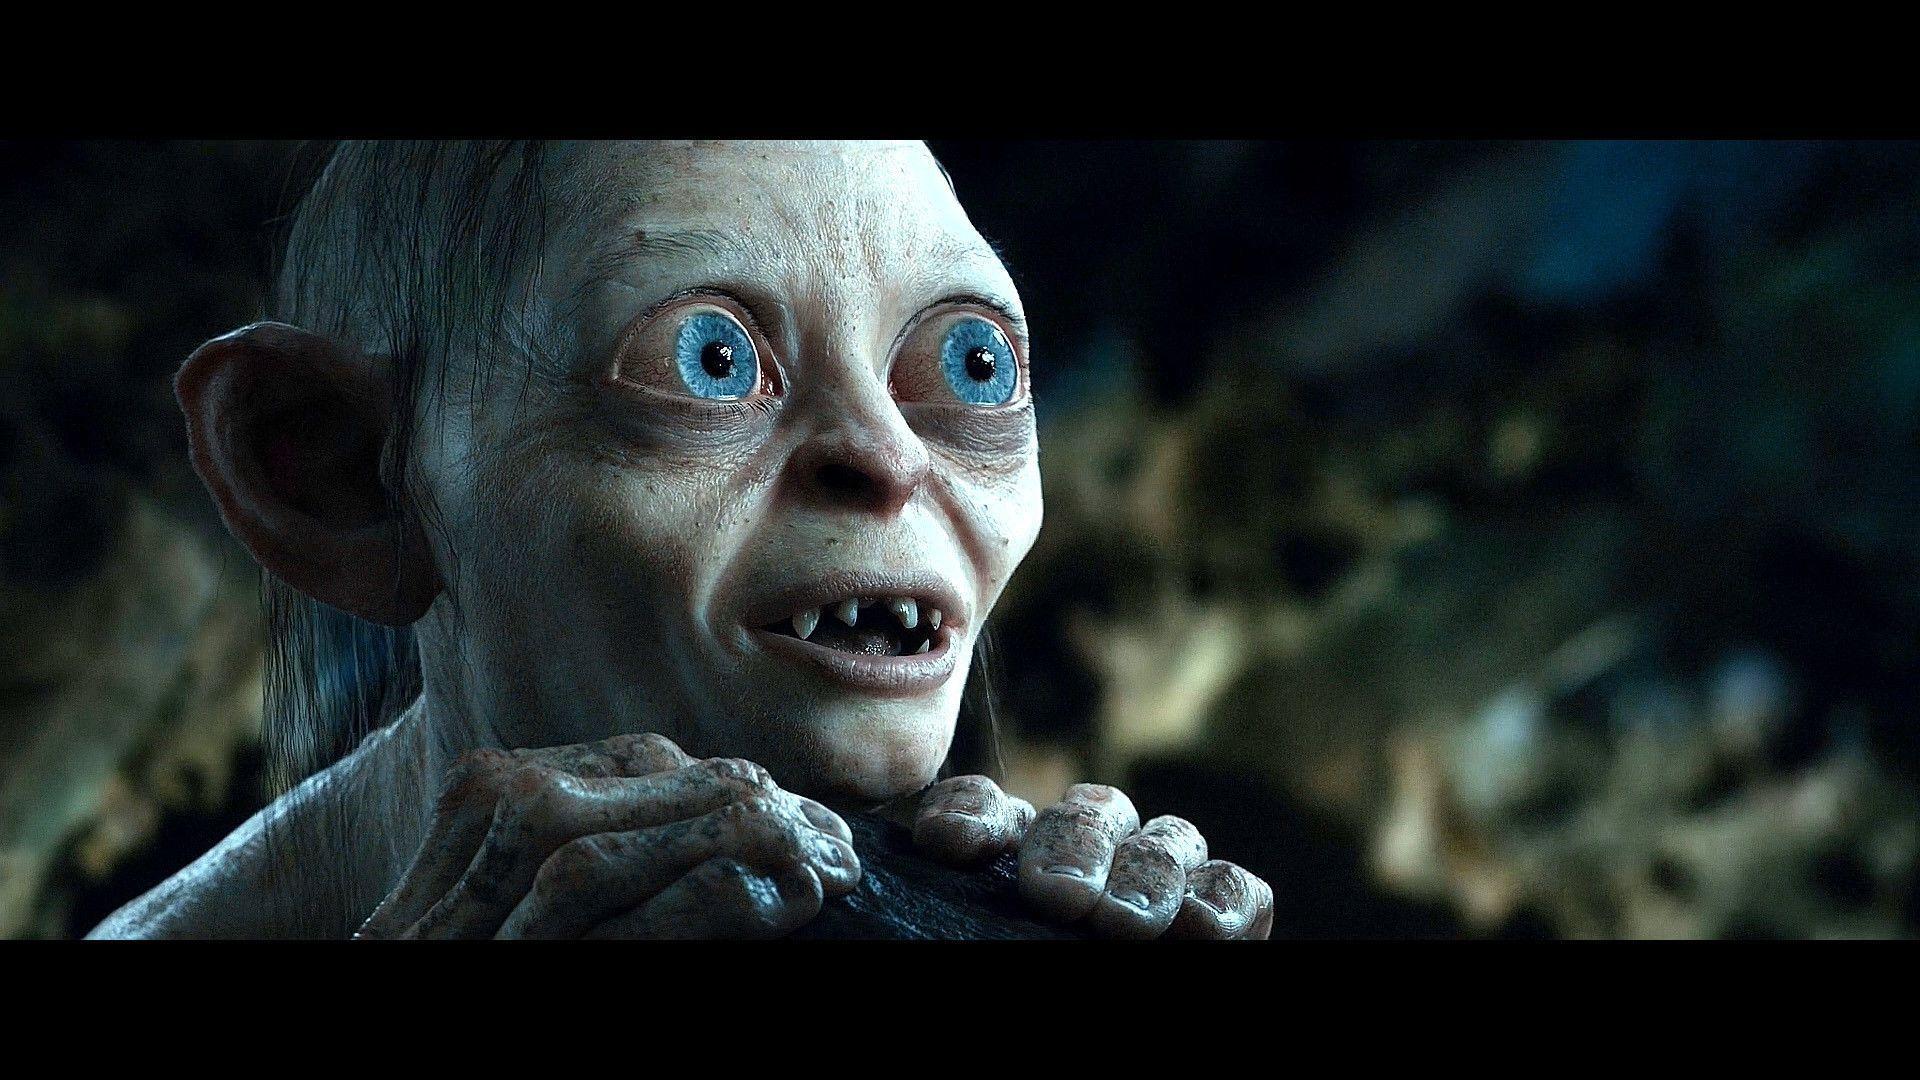 the lord of the rings cartoon gollum